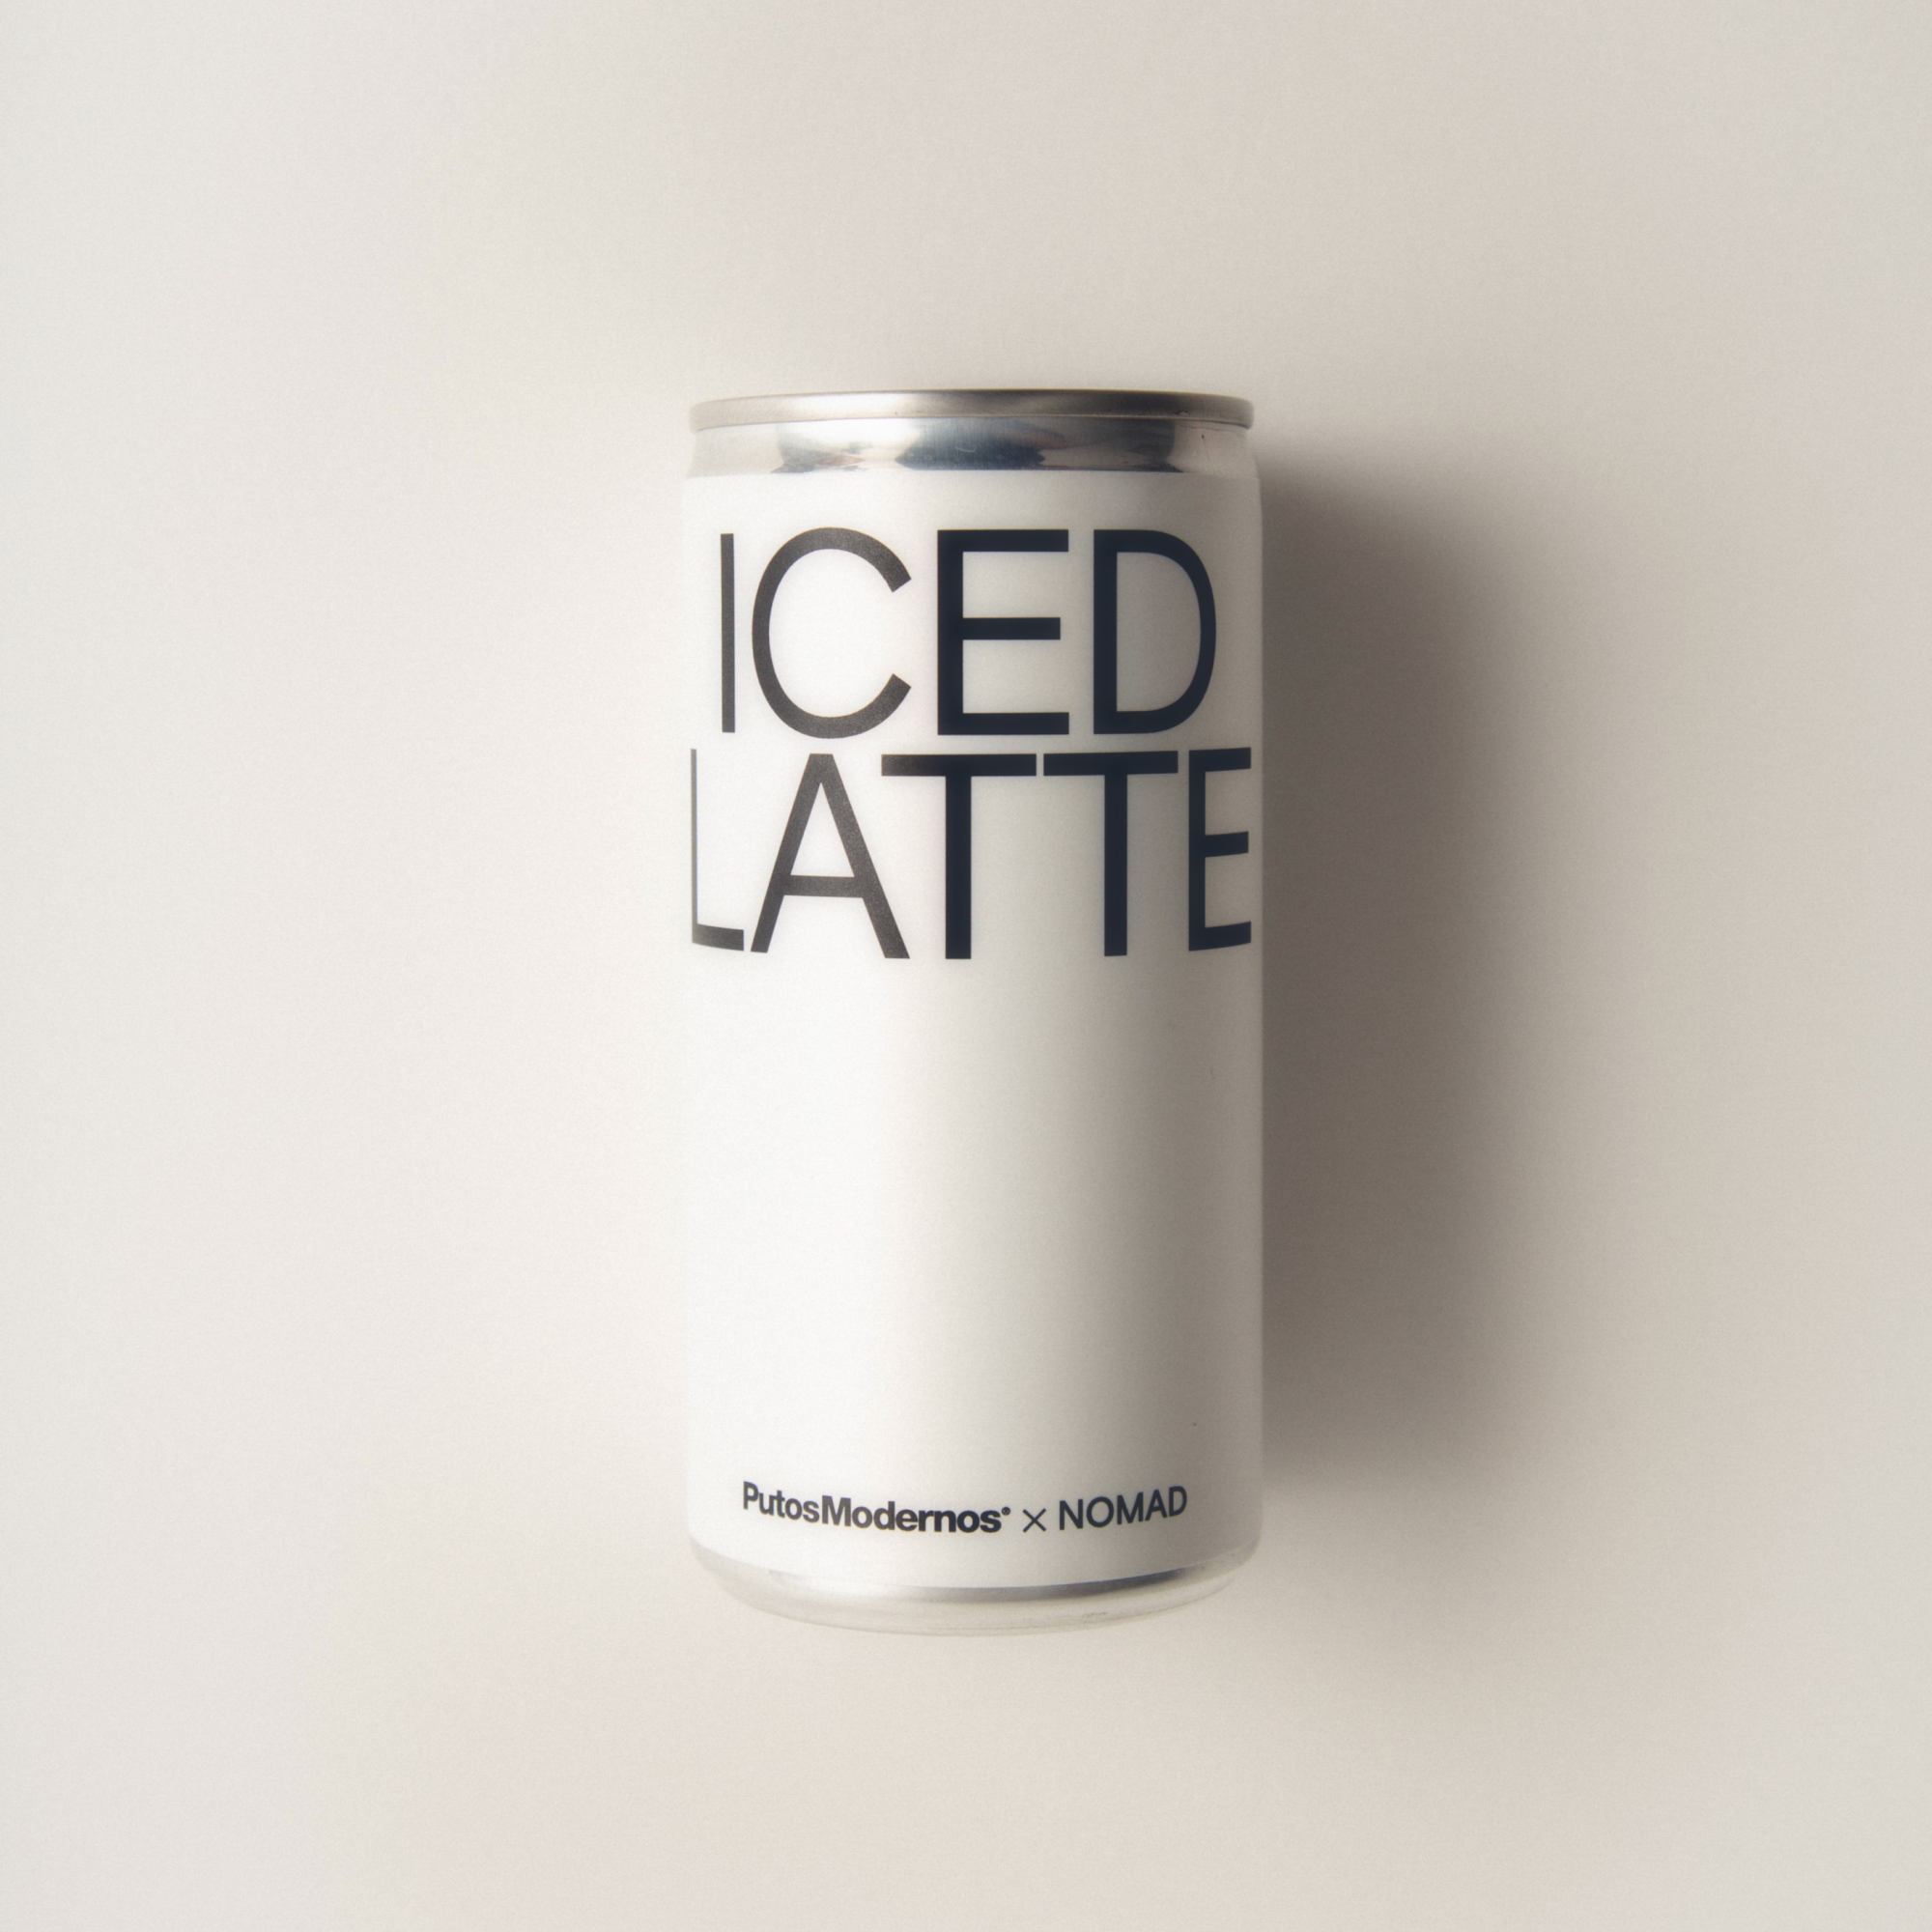 ICED LATTE<br/>CAN